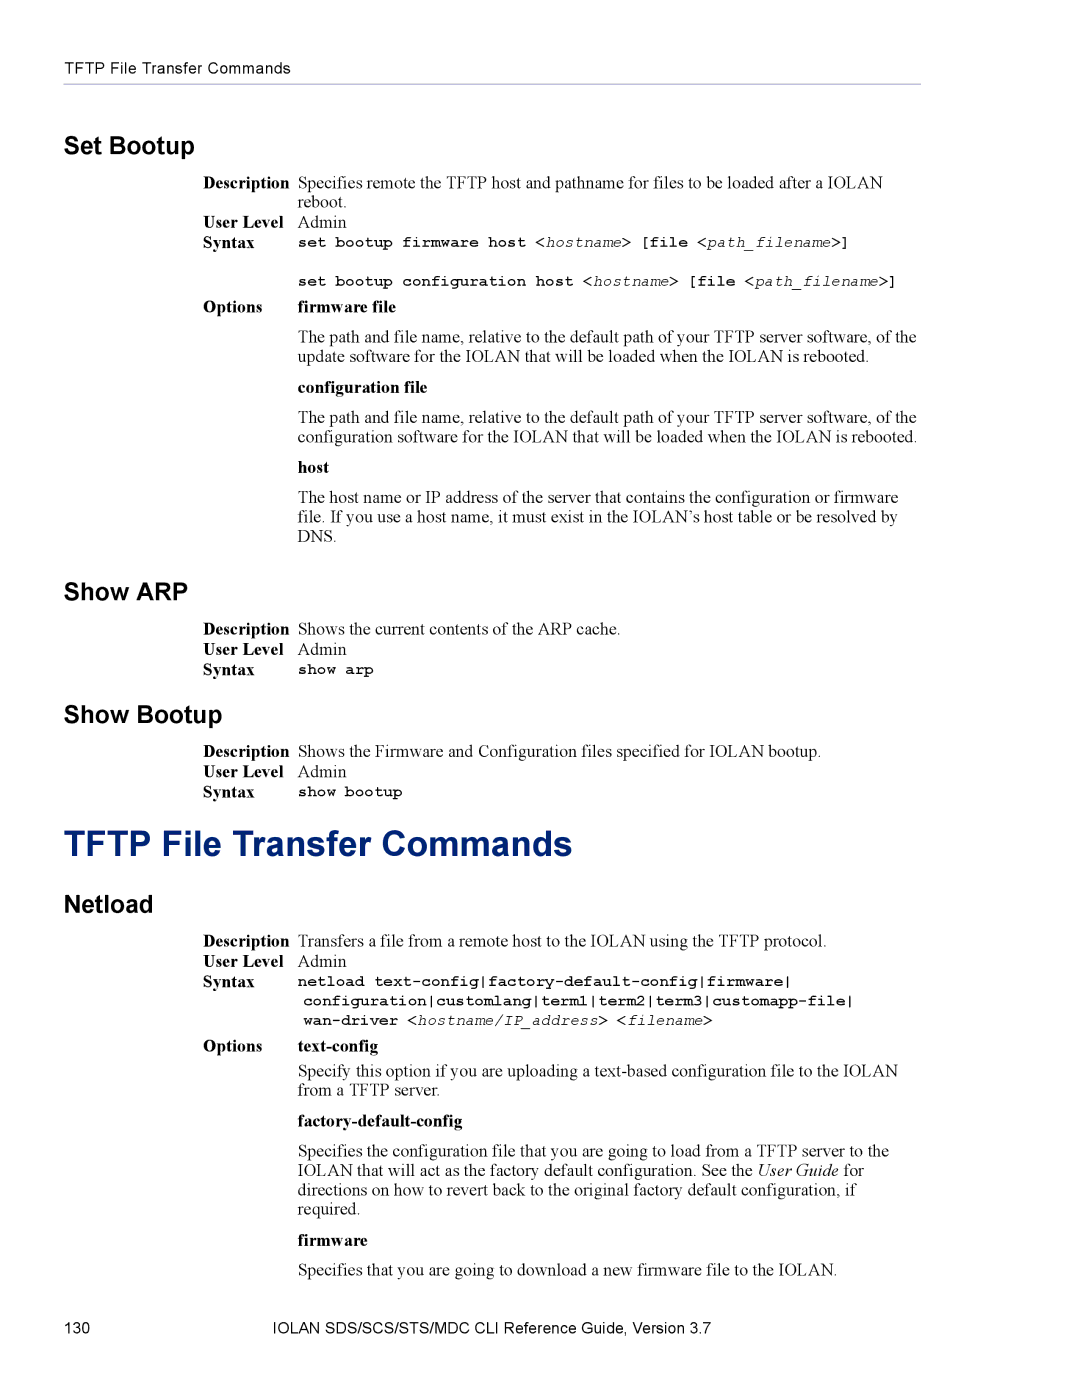 Perle Systems SDS, MDC manual Tftp File Transfer Commands, Set Bootup, Show ARP, Show Bootup, Netload 